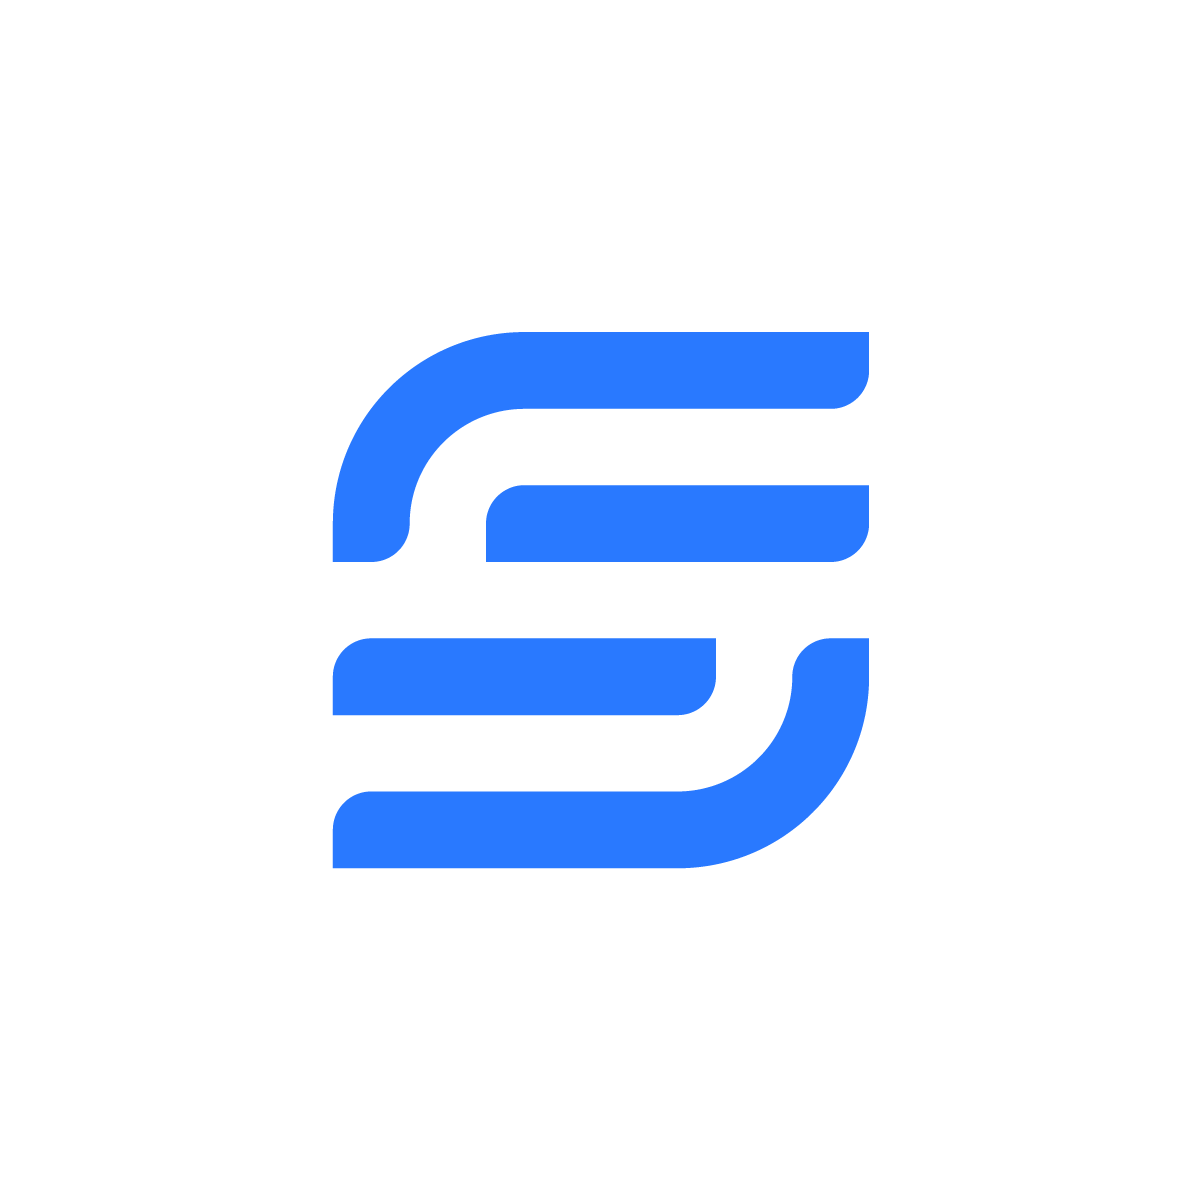 S Steps Logo: A square with rounded corners, lines forming the letter S inside